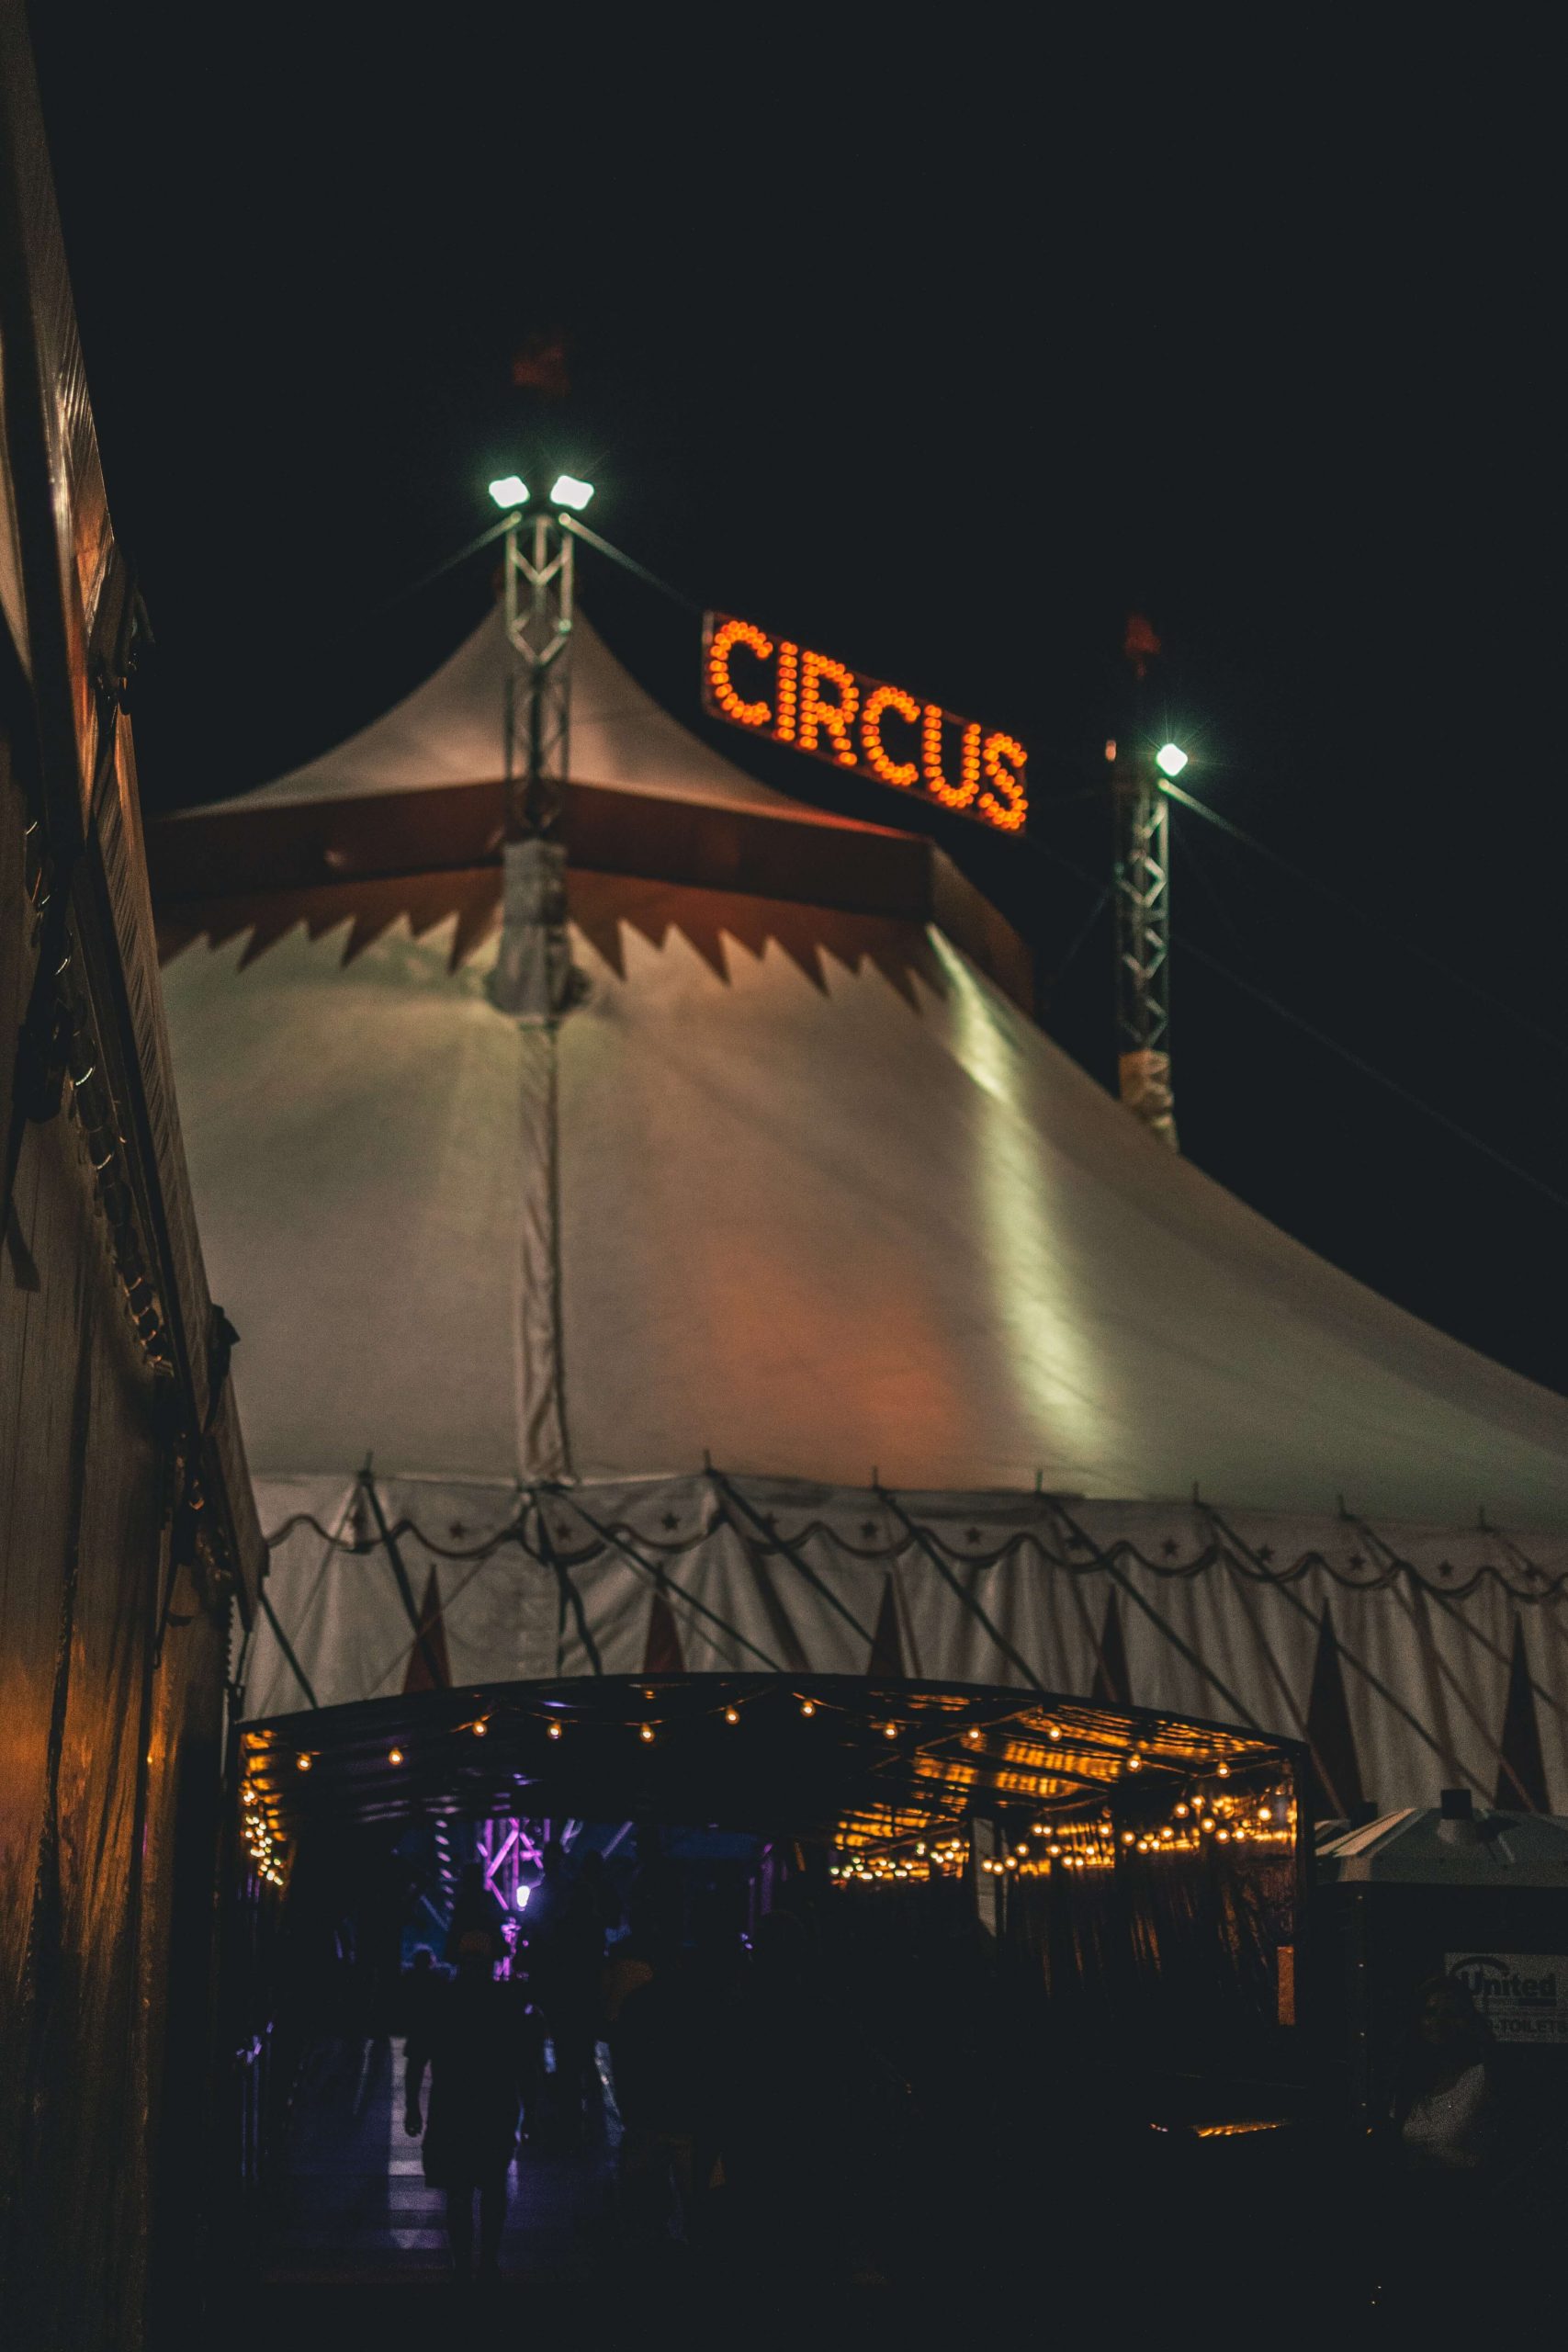 Going to the Circus…is it permissible?